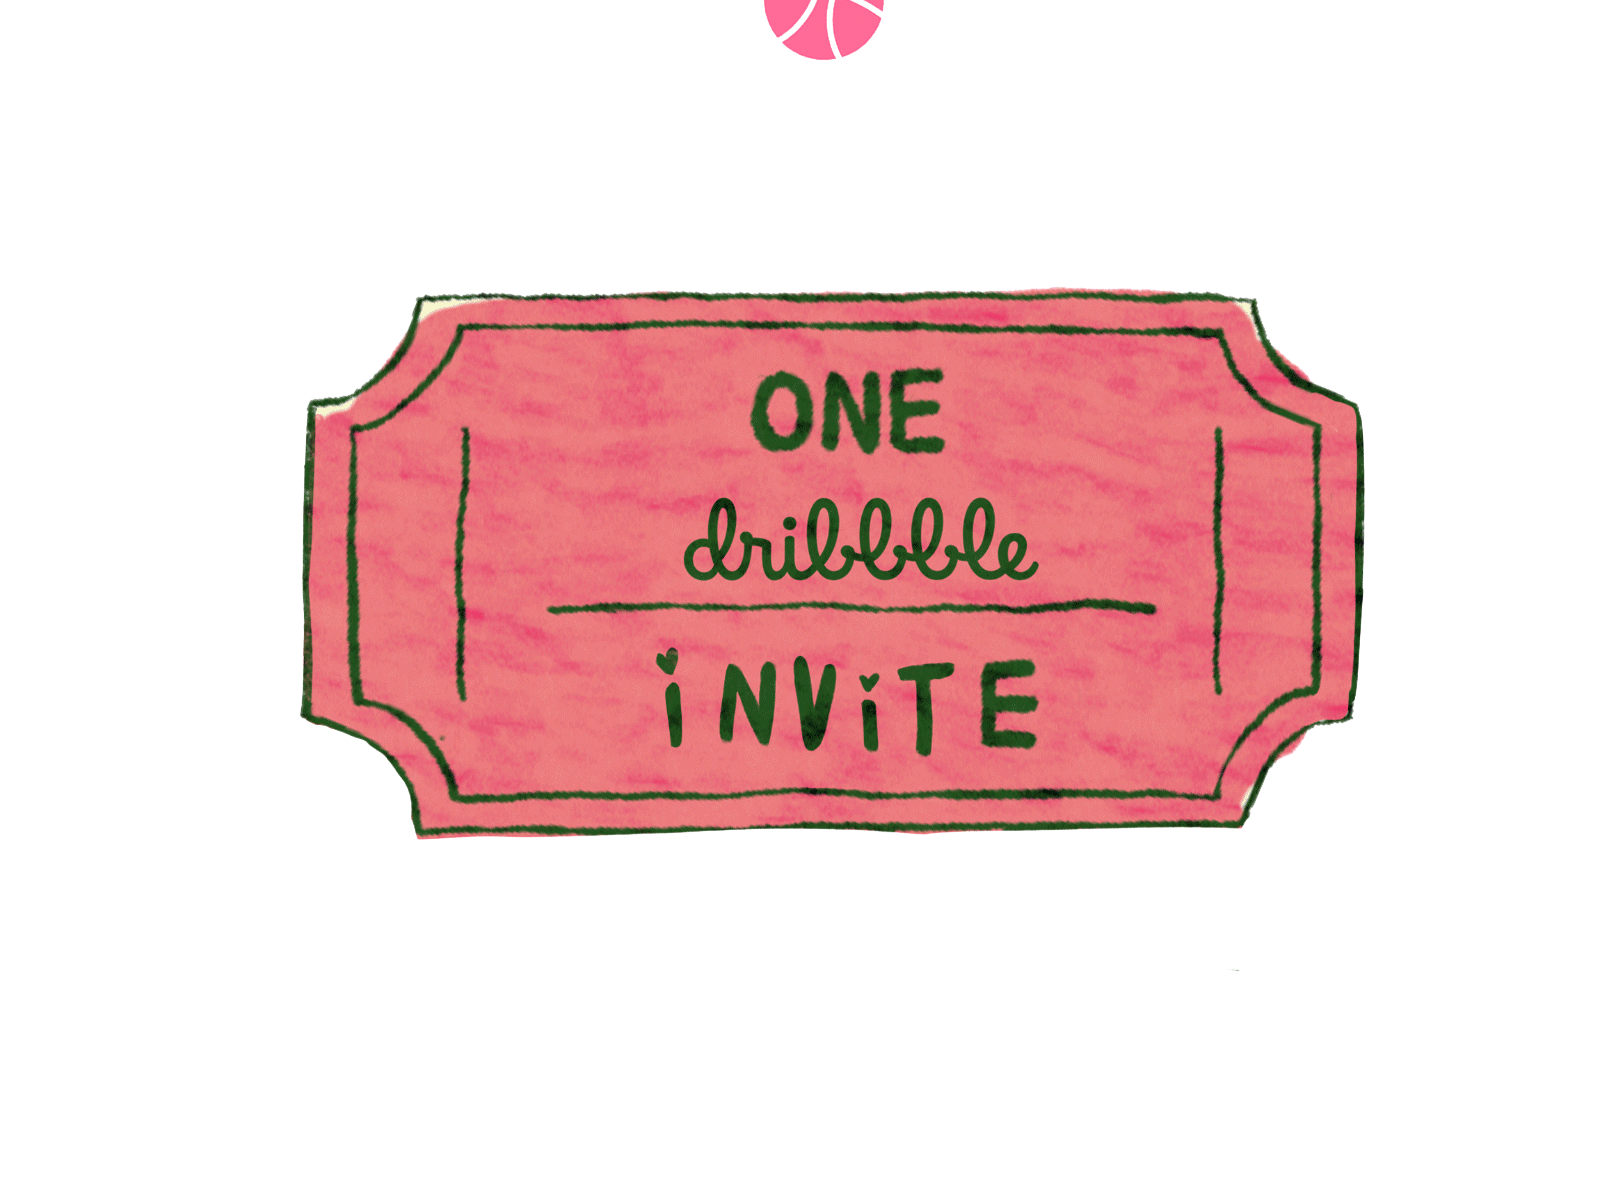 INVITE ❤ animated gif animation drawing dribble invite frame by frame illustration minimalist peachy pink sketchy textures ticker animation ticket